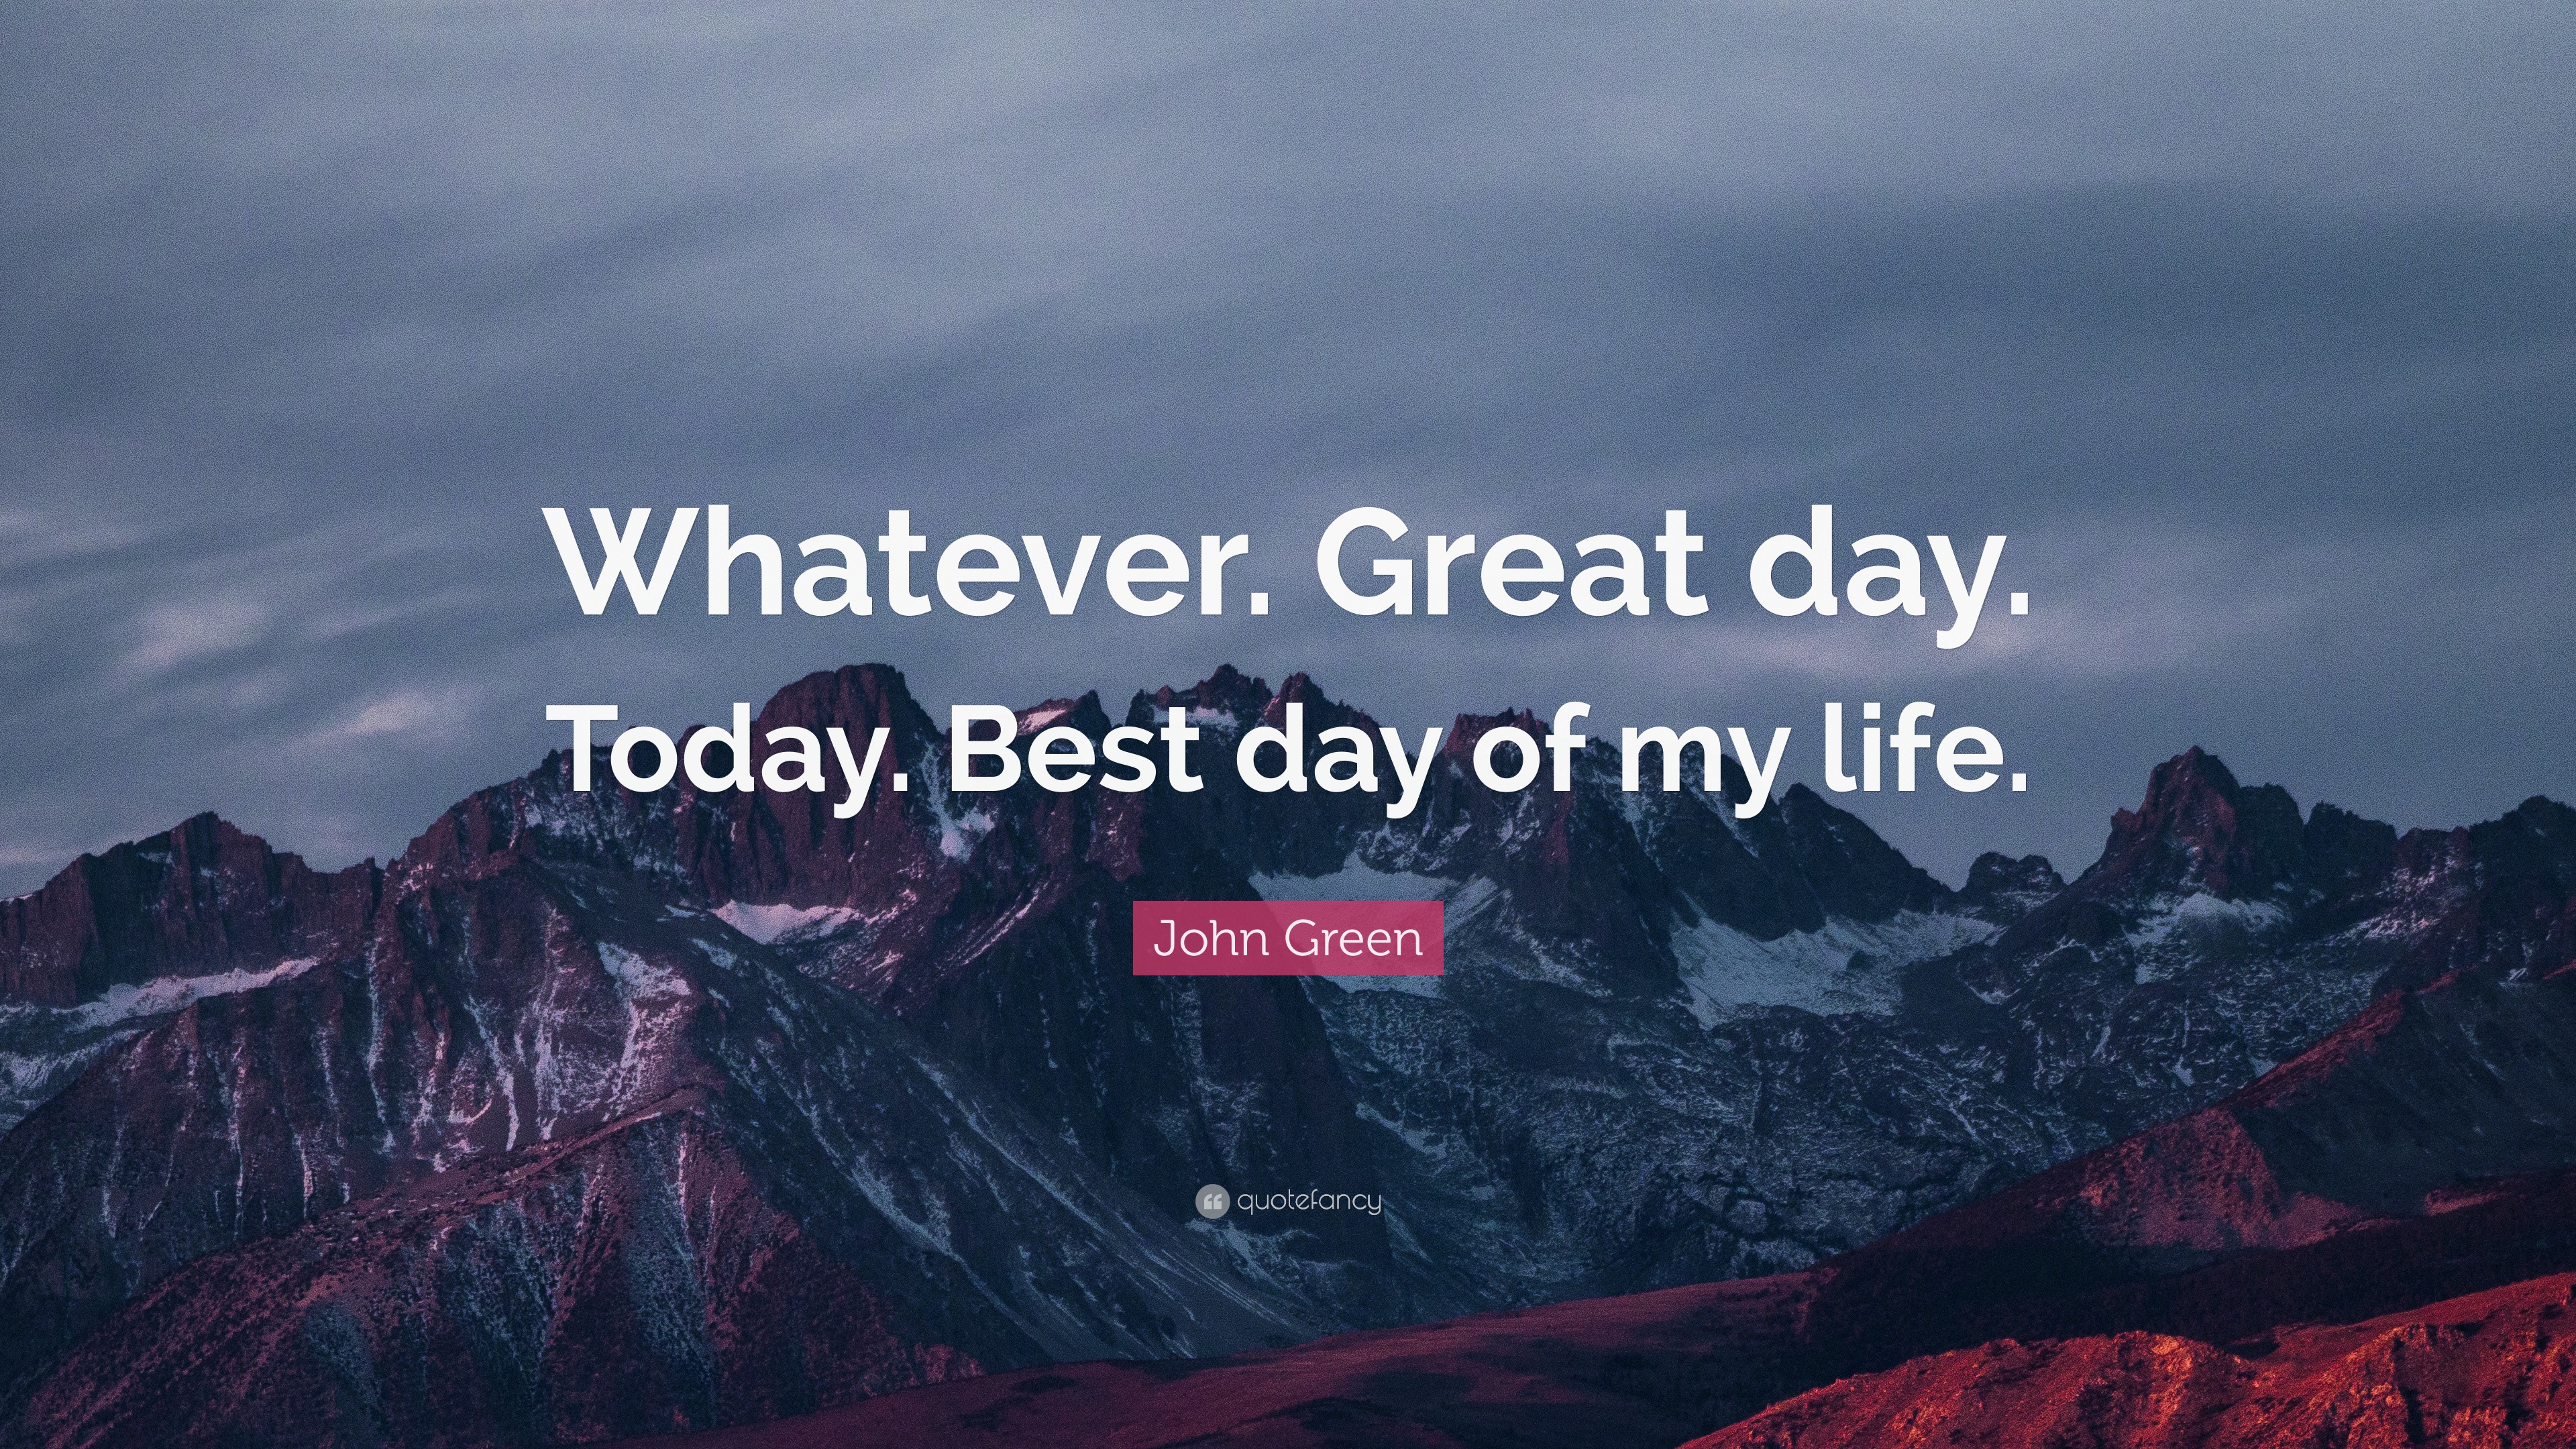 John Green Quote: “Whatever. Great day. Today. Best day of my life.”